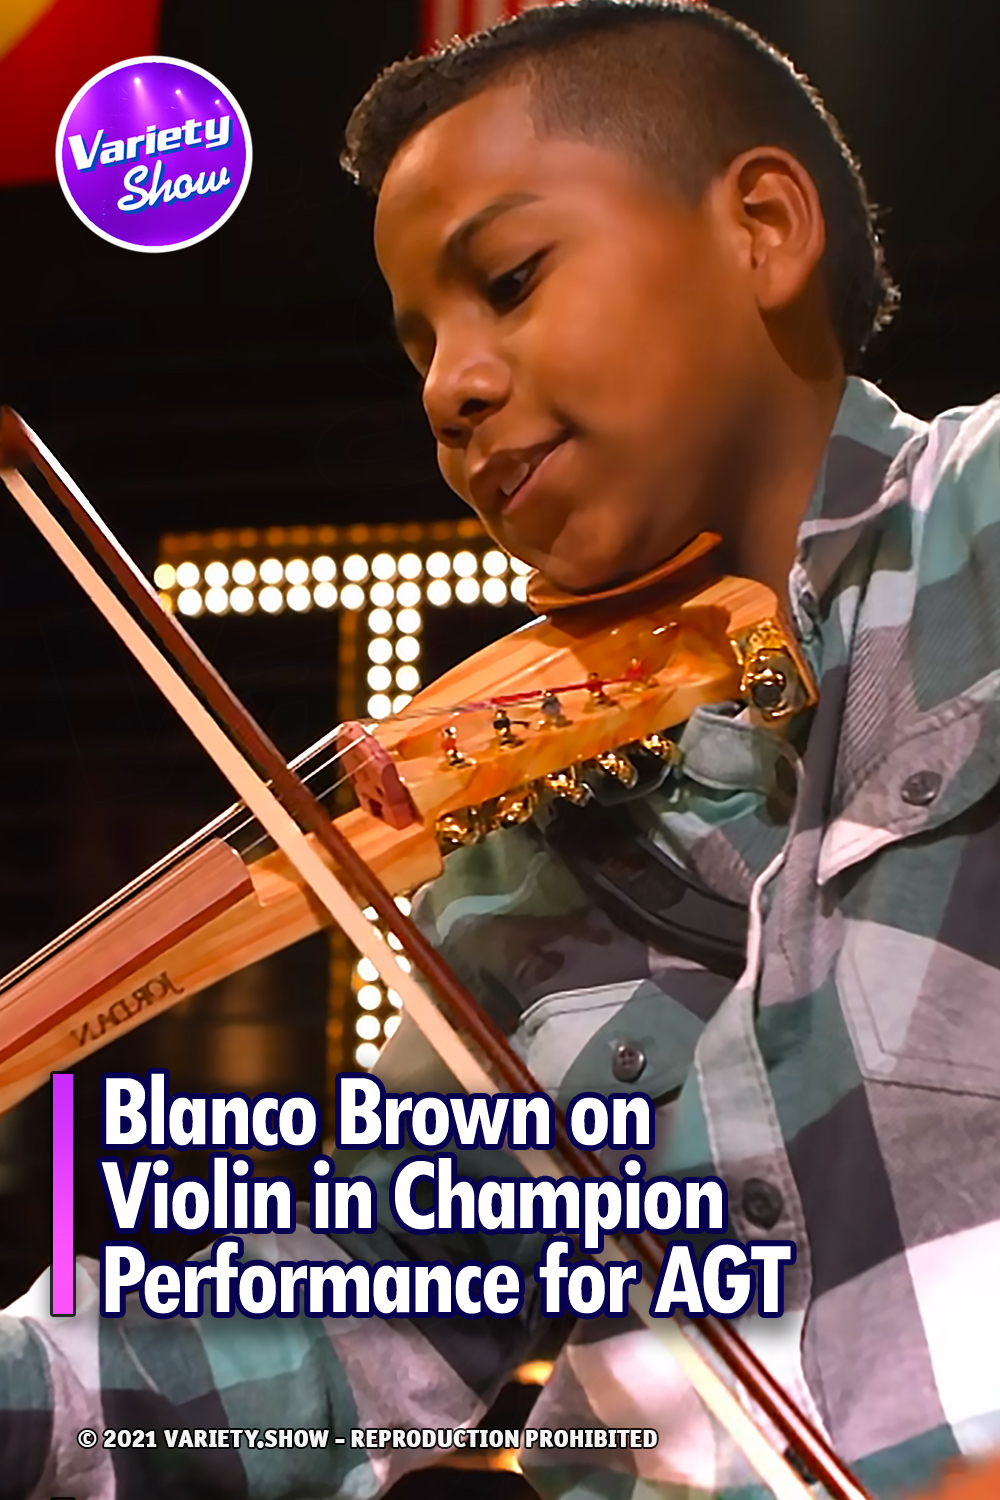 Blanco Brown on Violin in Champion Performance for AGT